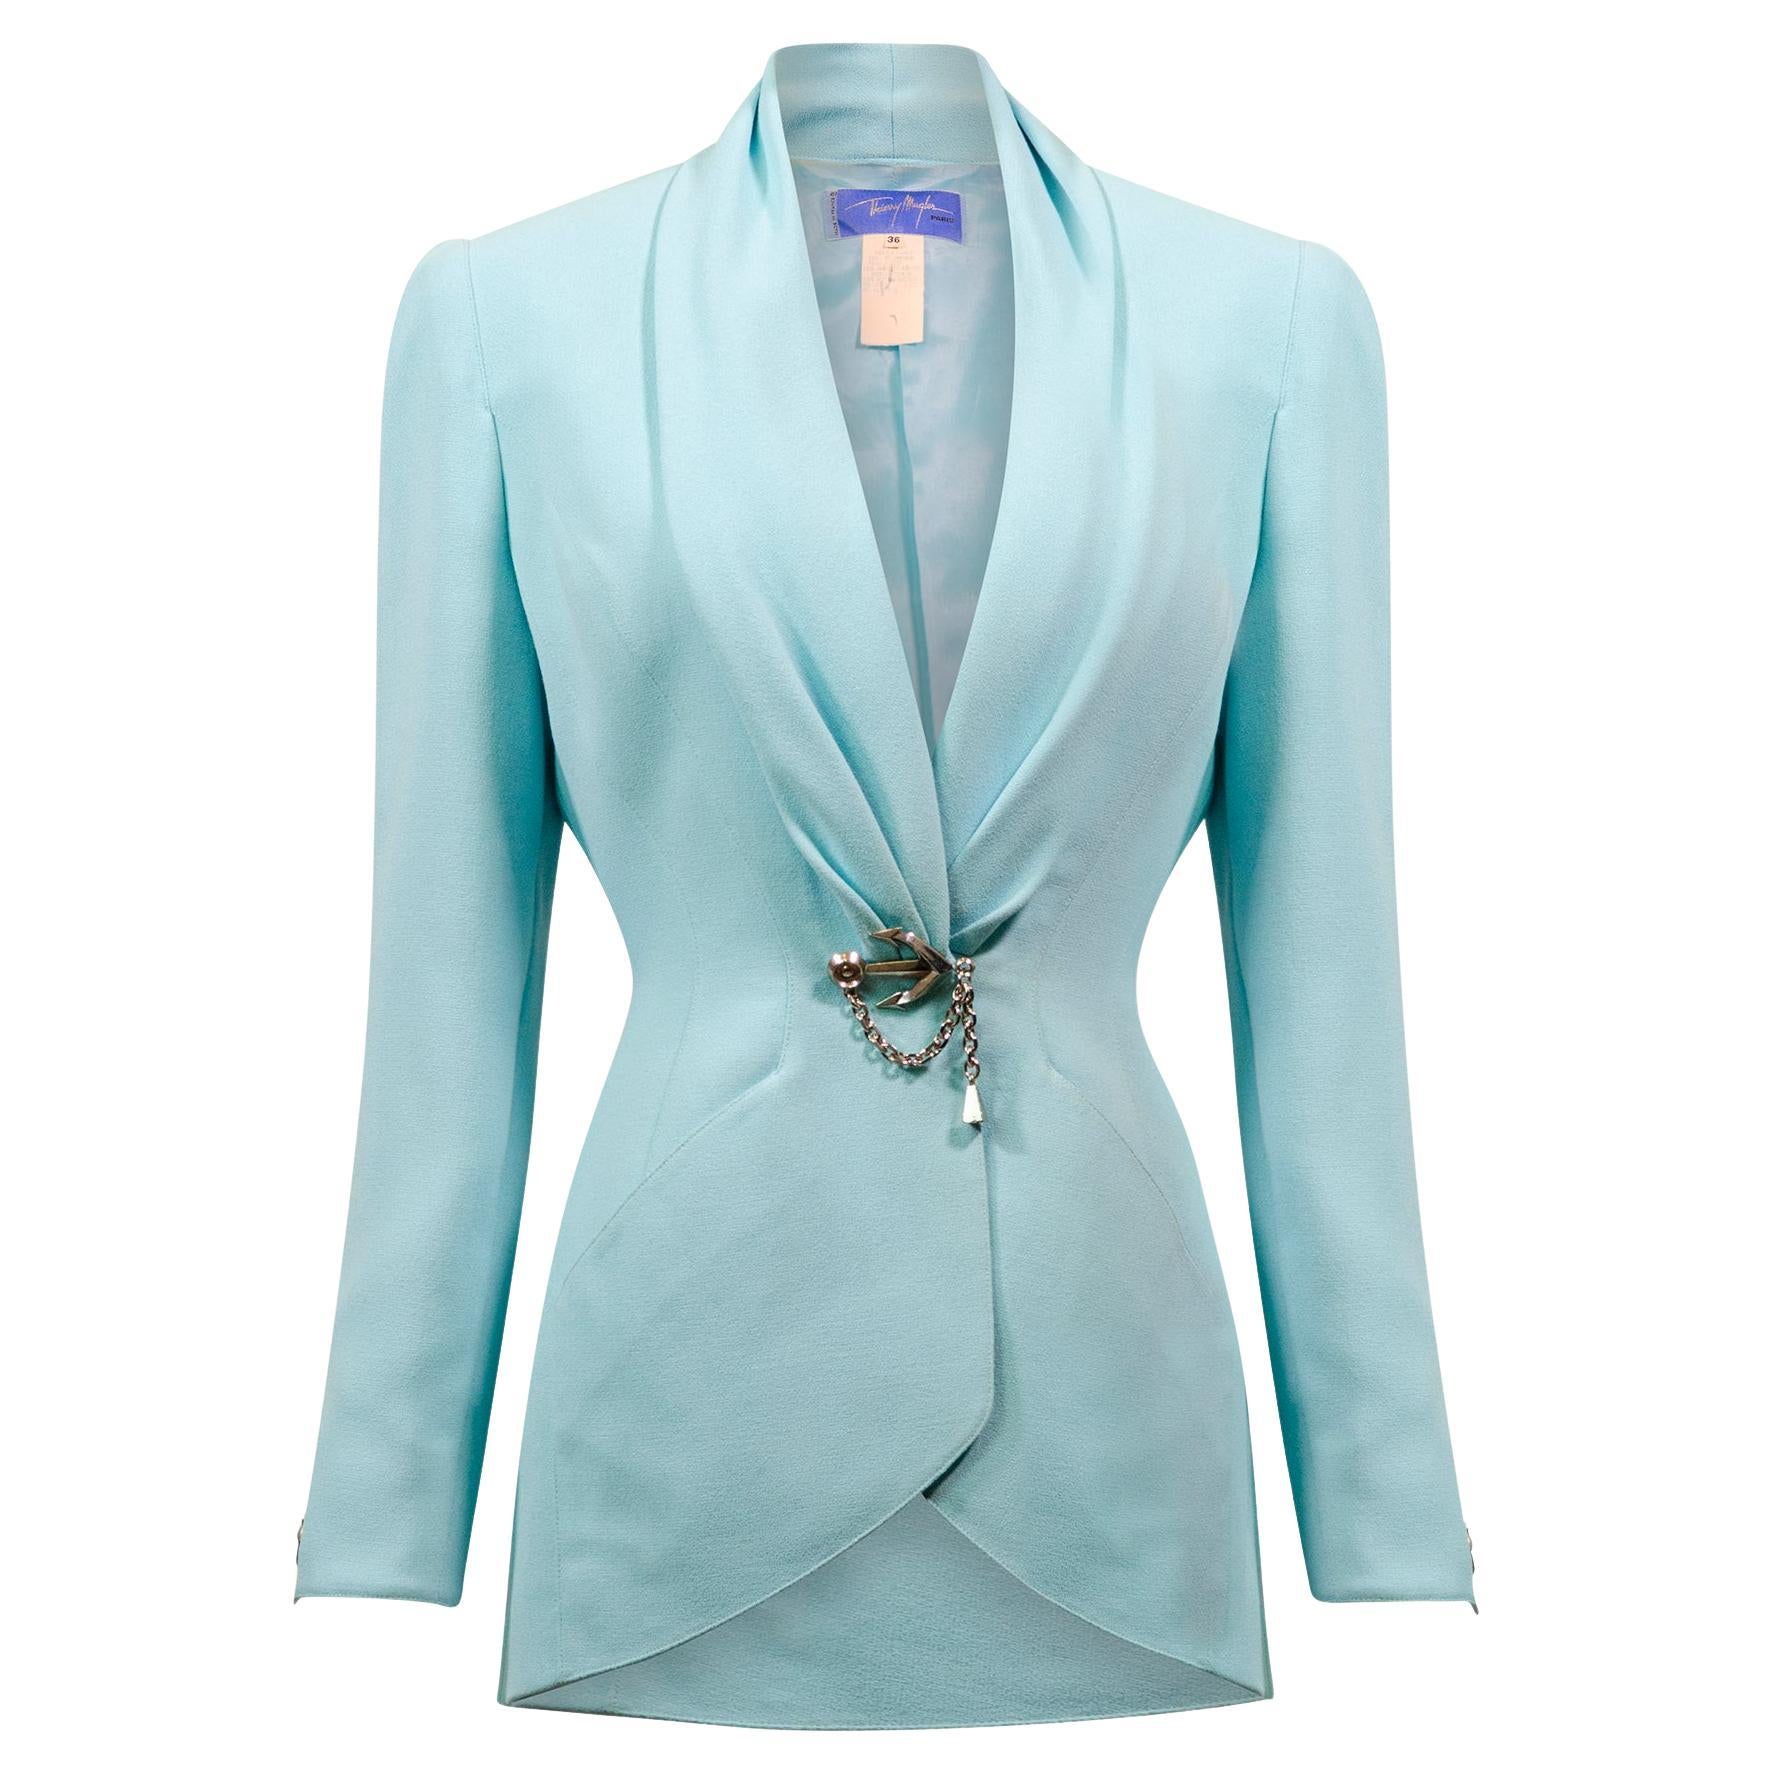 Thierry Mugler Vintage Pastel Blue Jacket with Anchors Nautical Aquatic